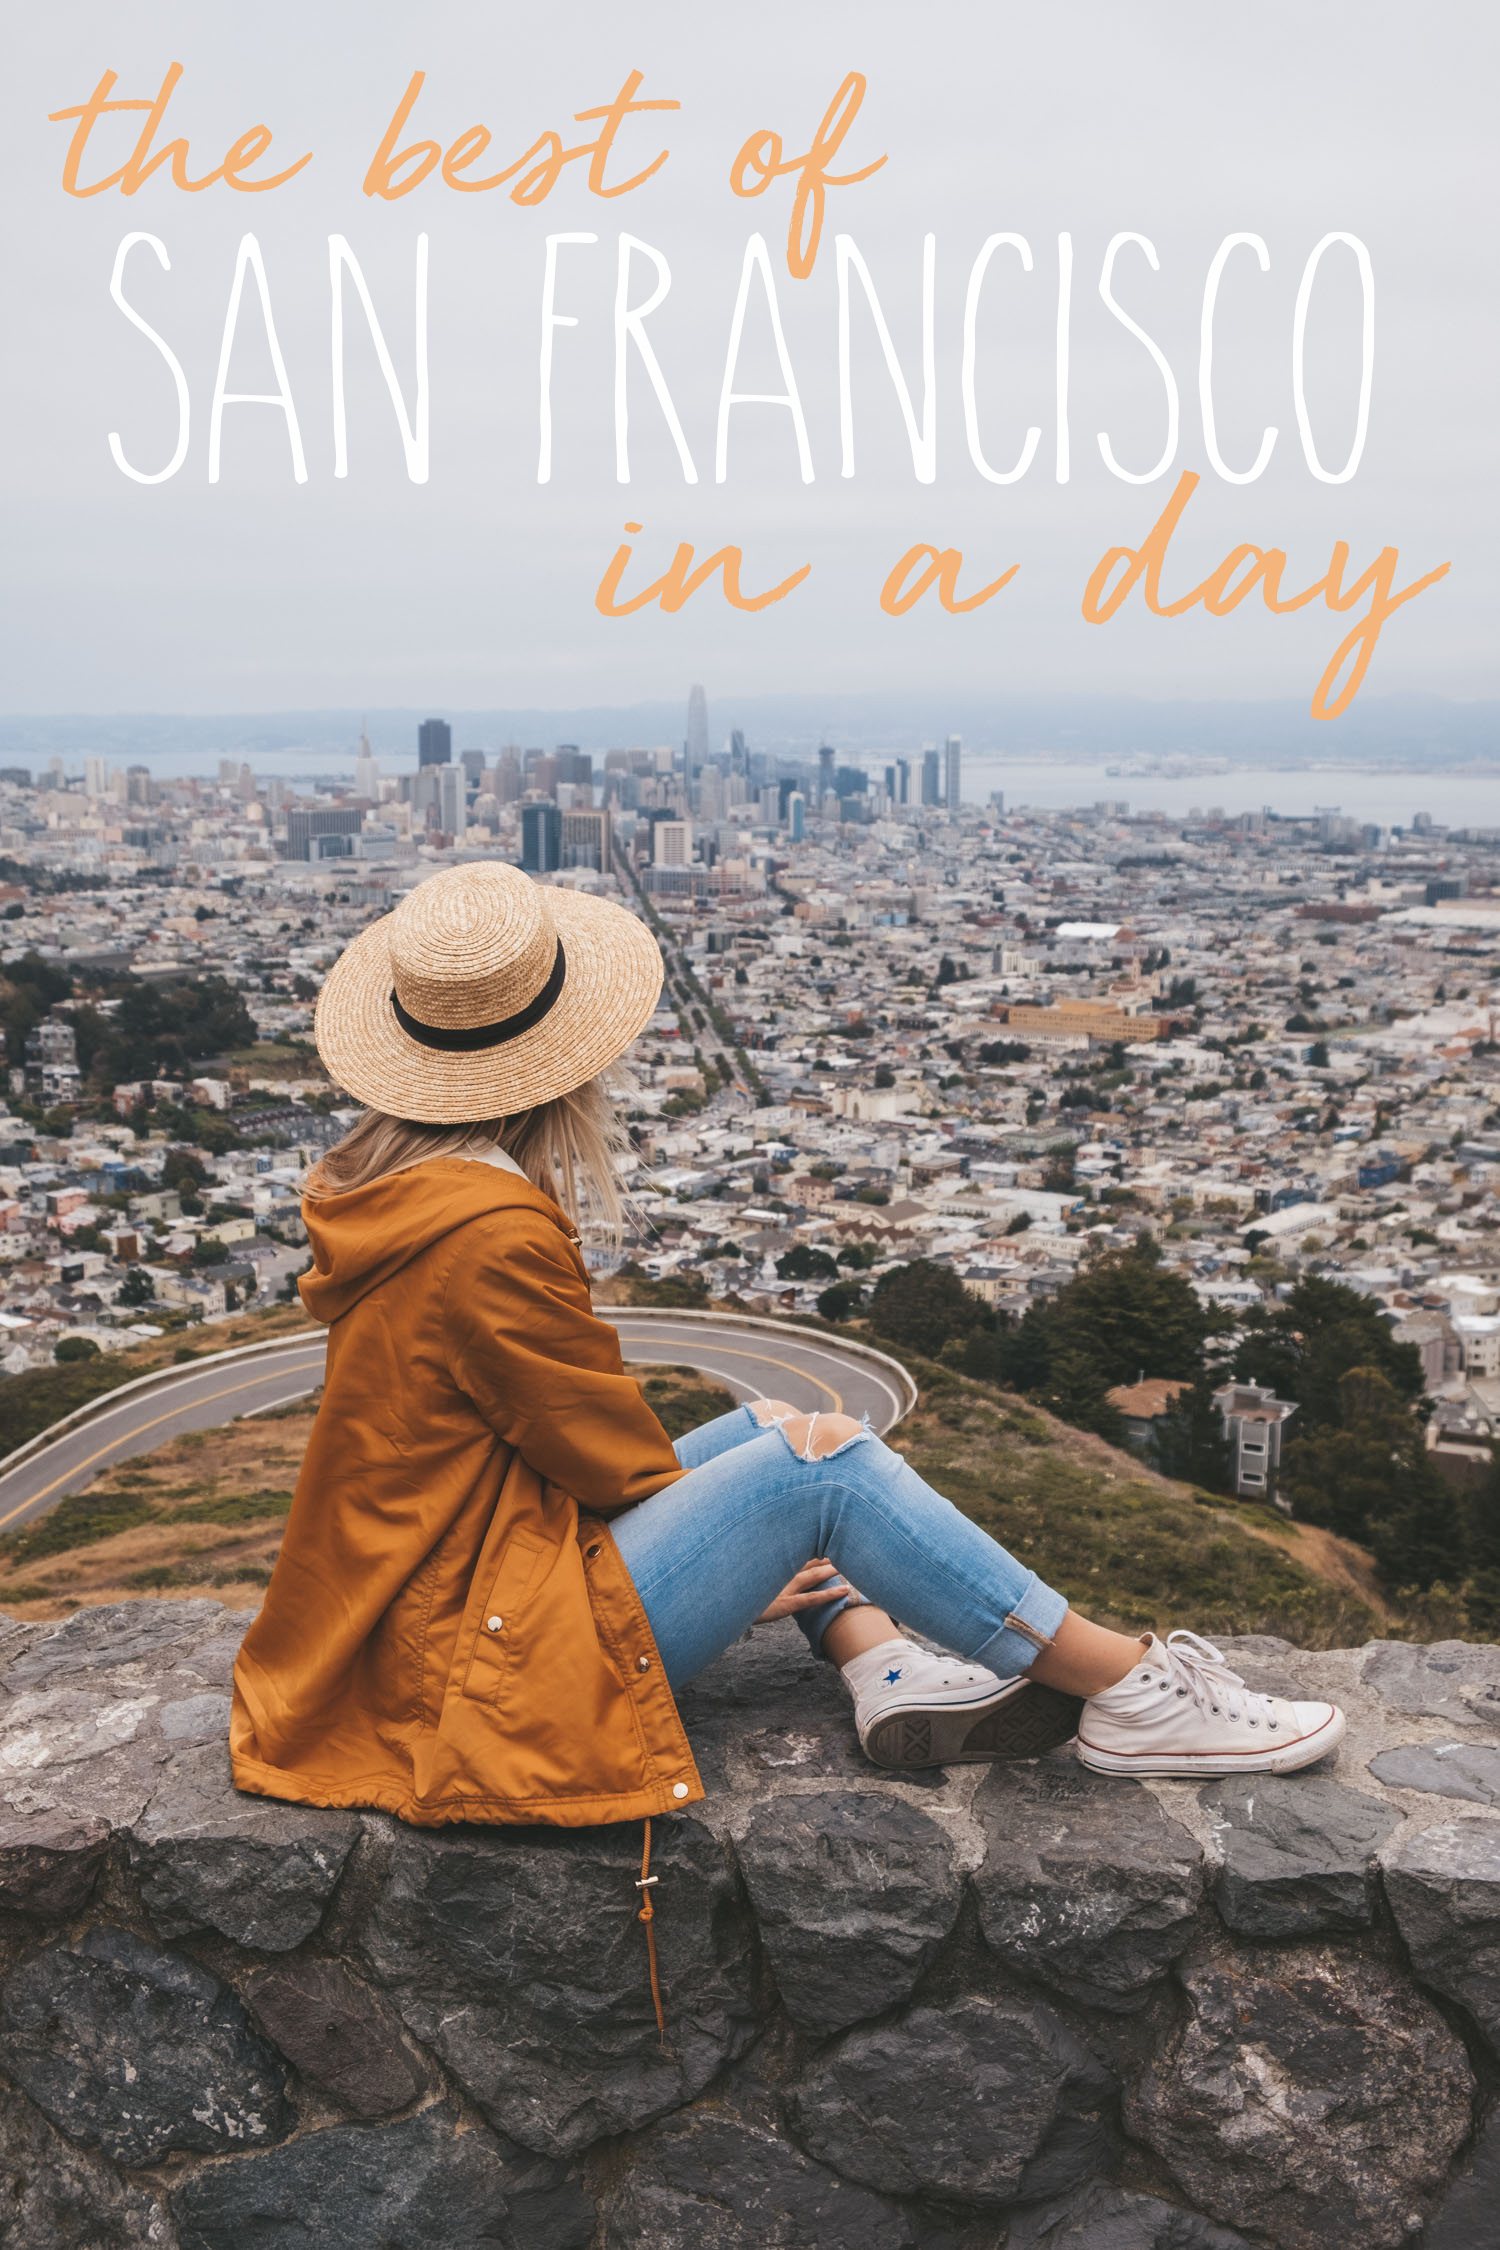 The Best of San Francisco in a Day